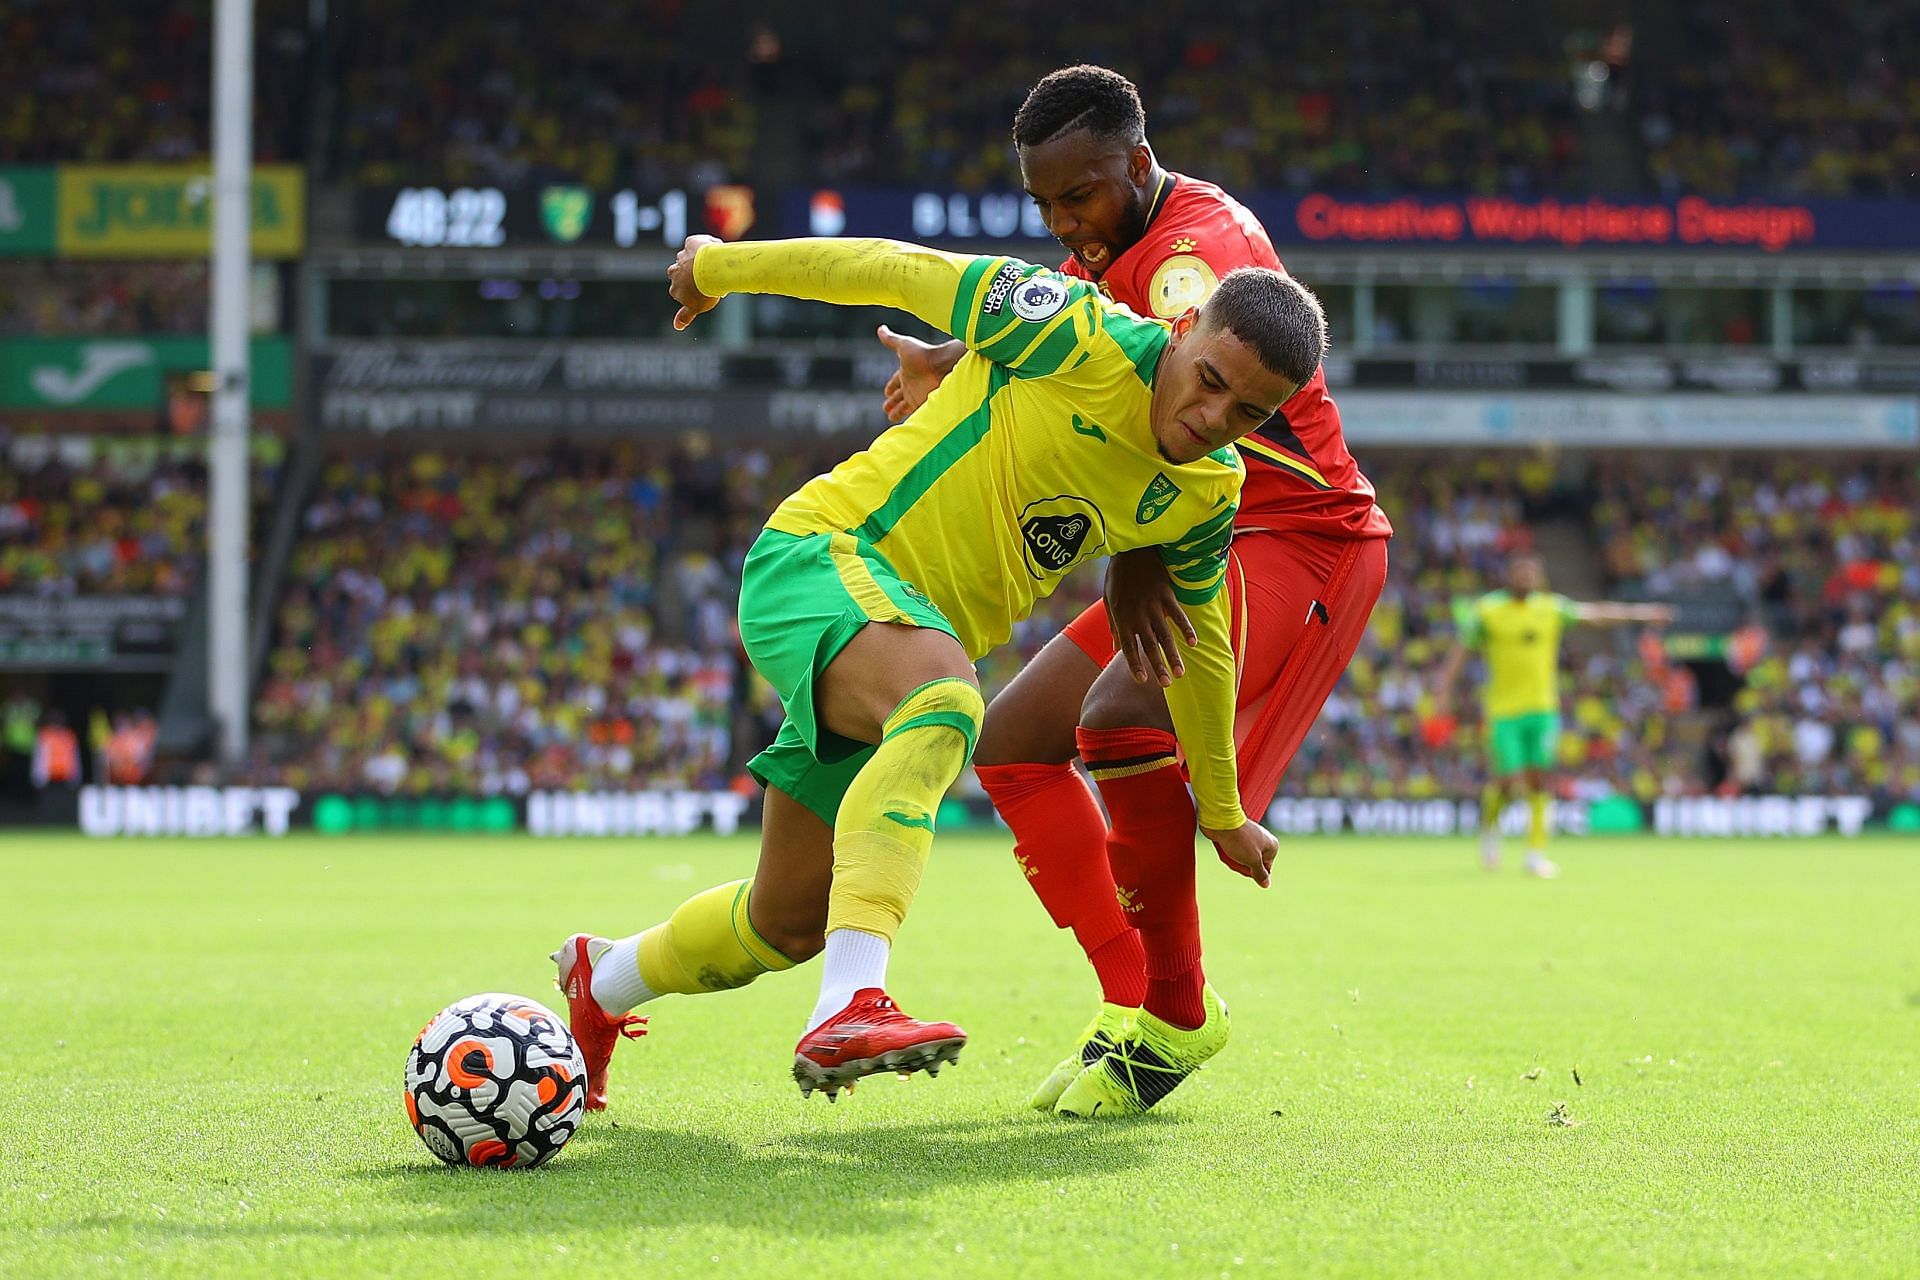 Watford vs Norwich City Prediction and Betting Tips - 21st January 2022